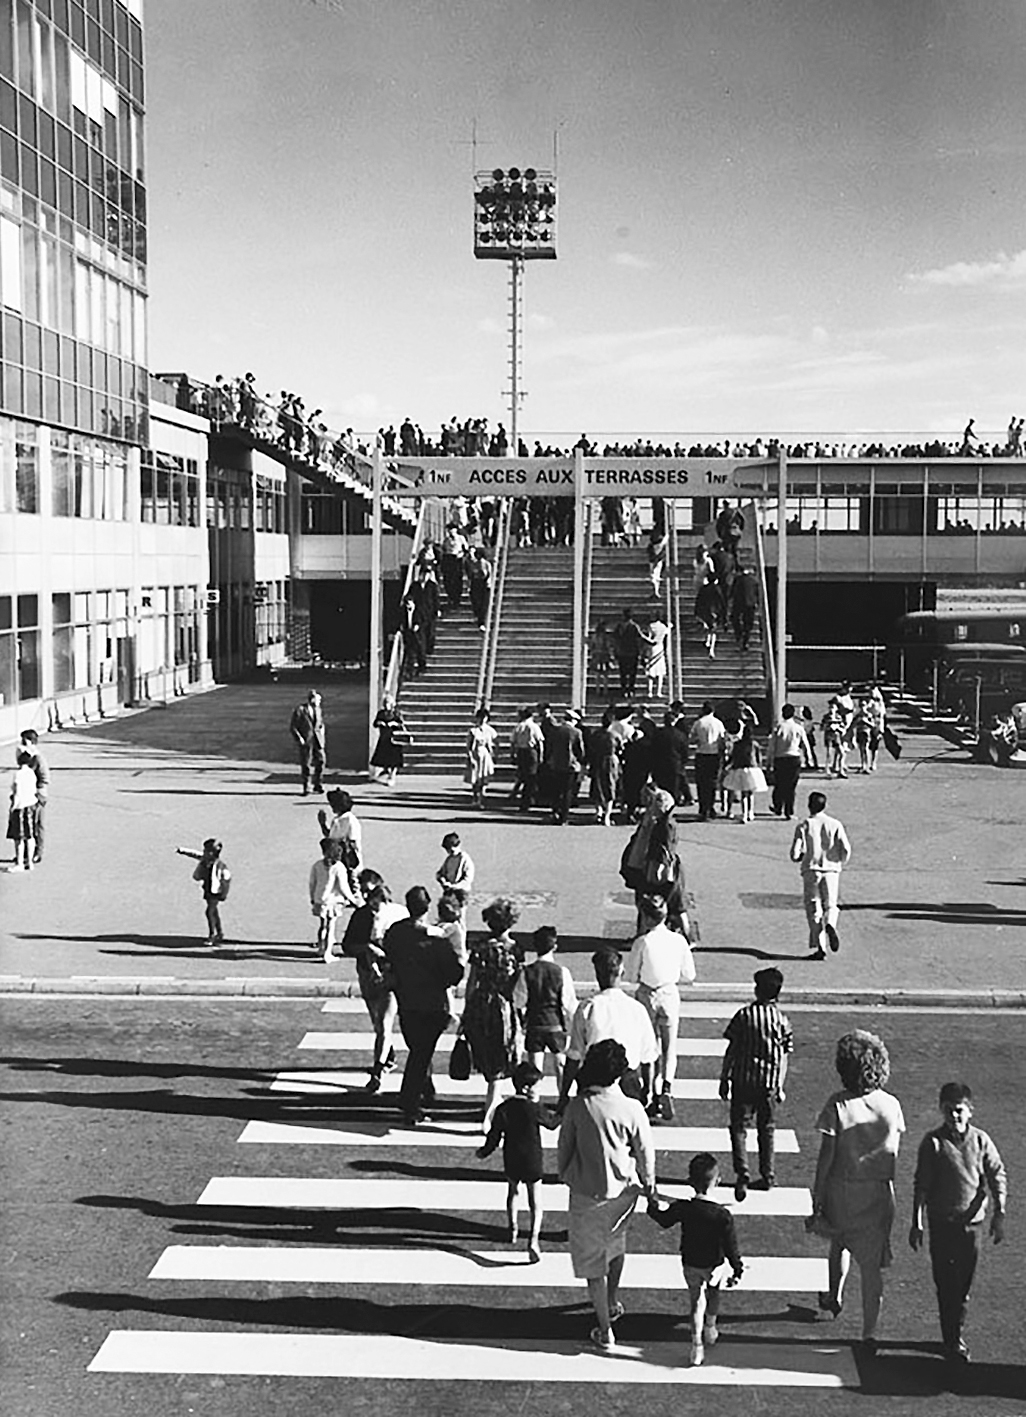 Entrance portal frame at Orly Sud airport (H. Vicariot, architect), 1959.